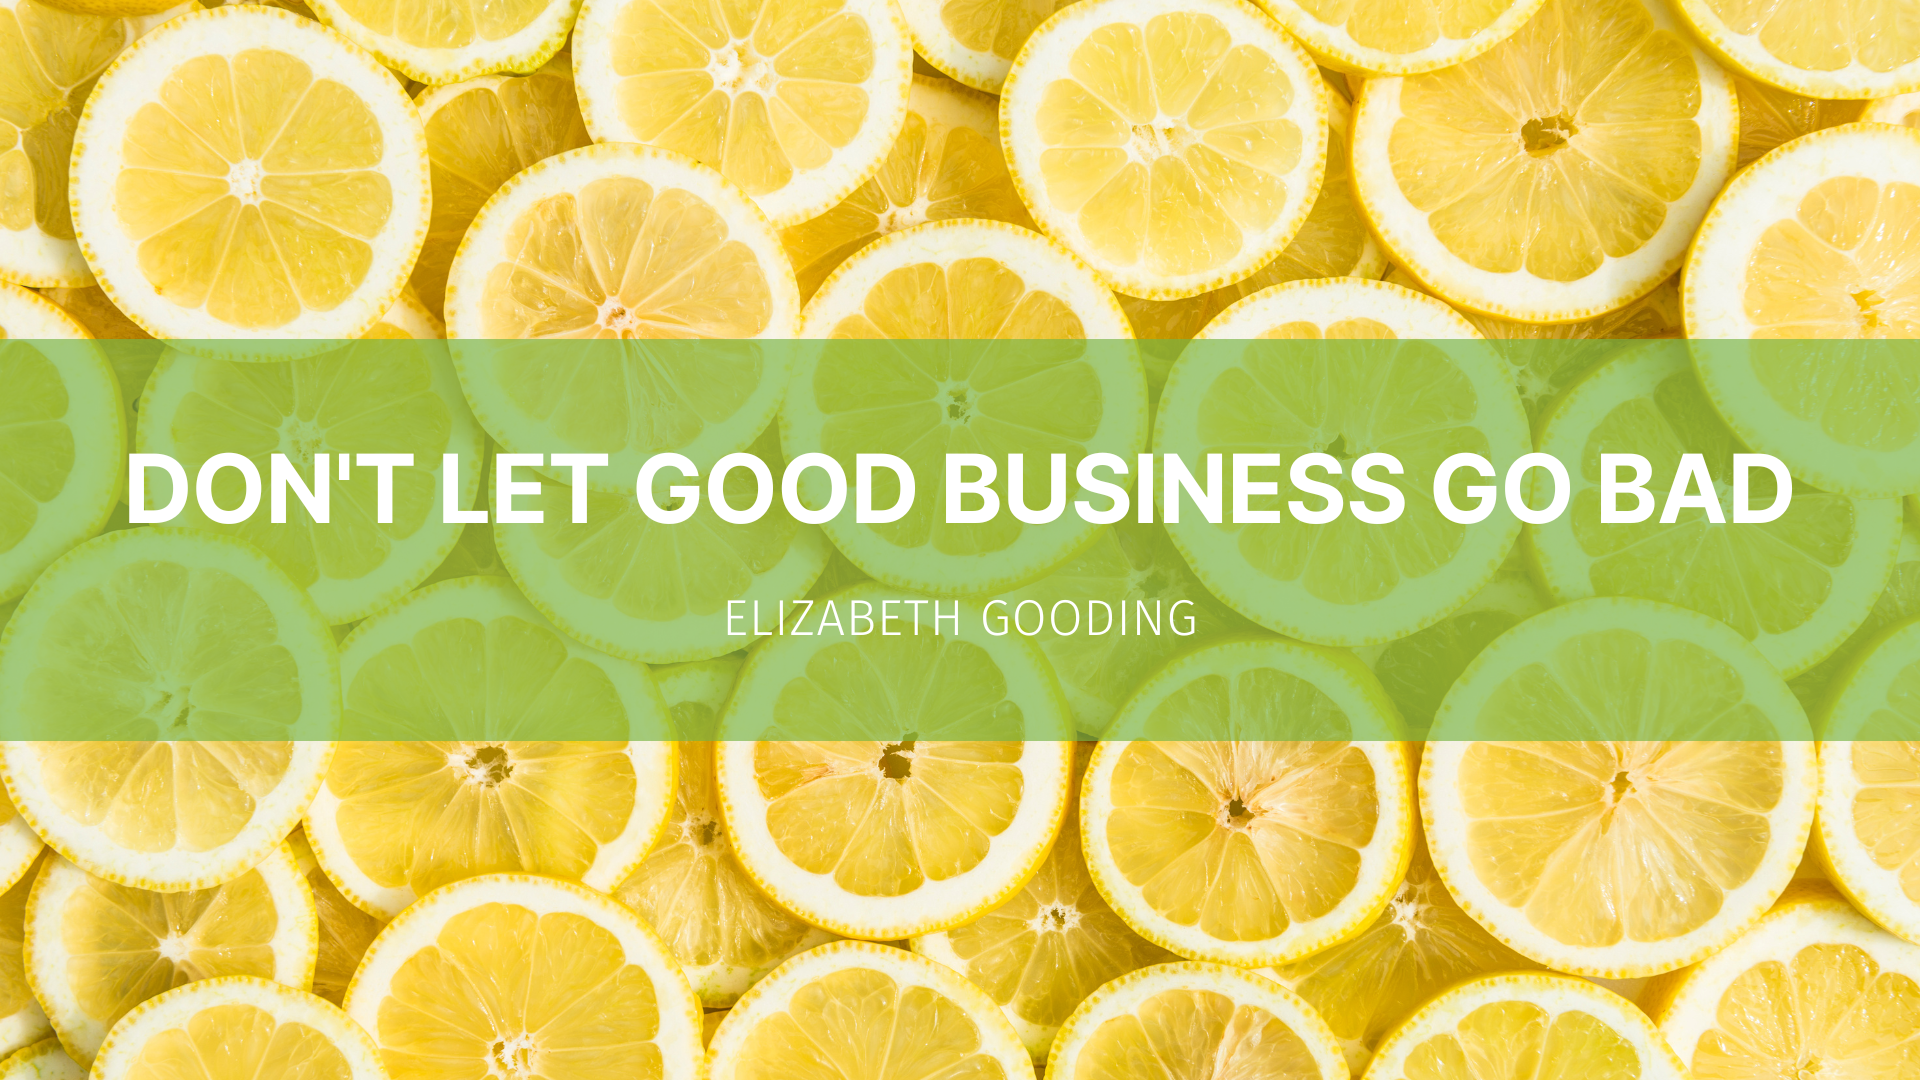 Featured image for “Don’t let good business go bad”